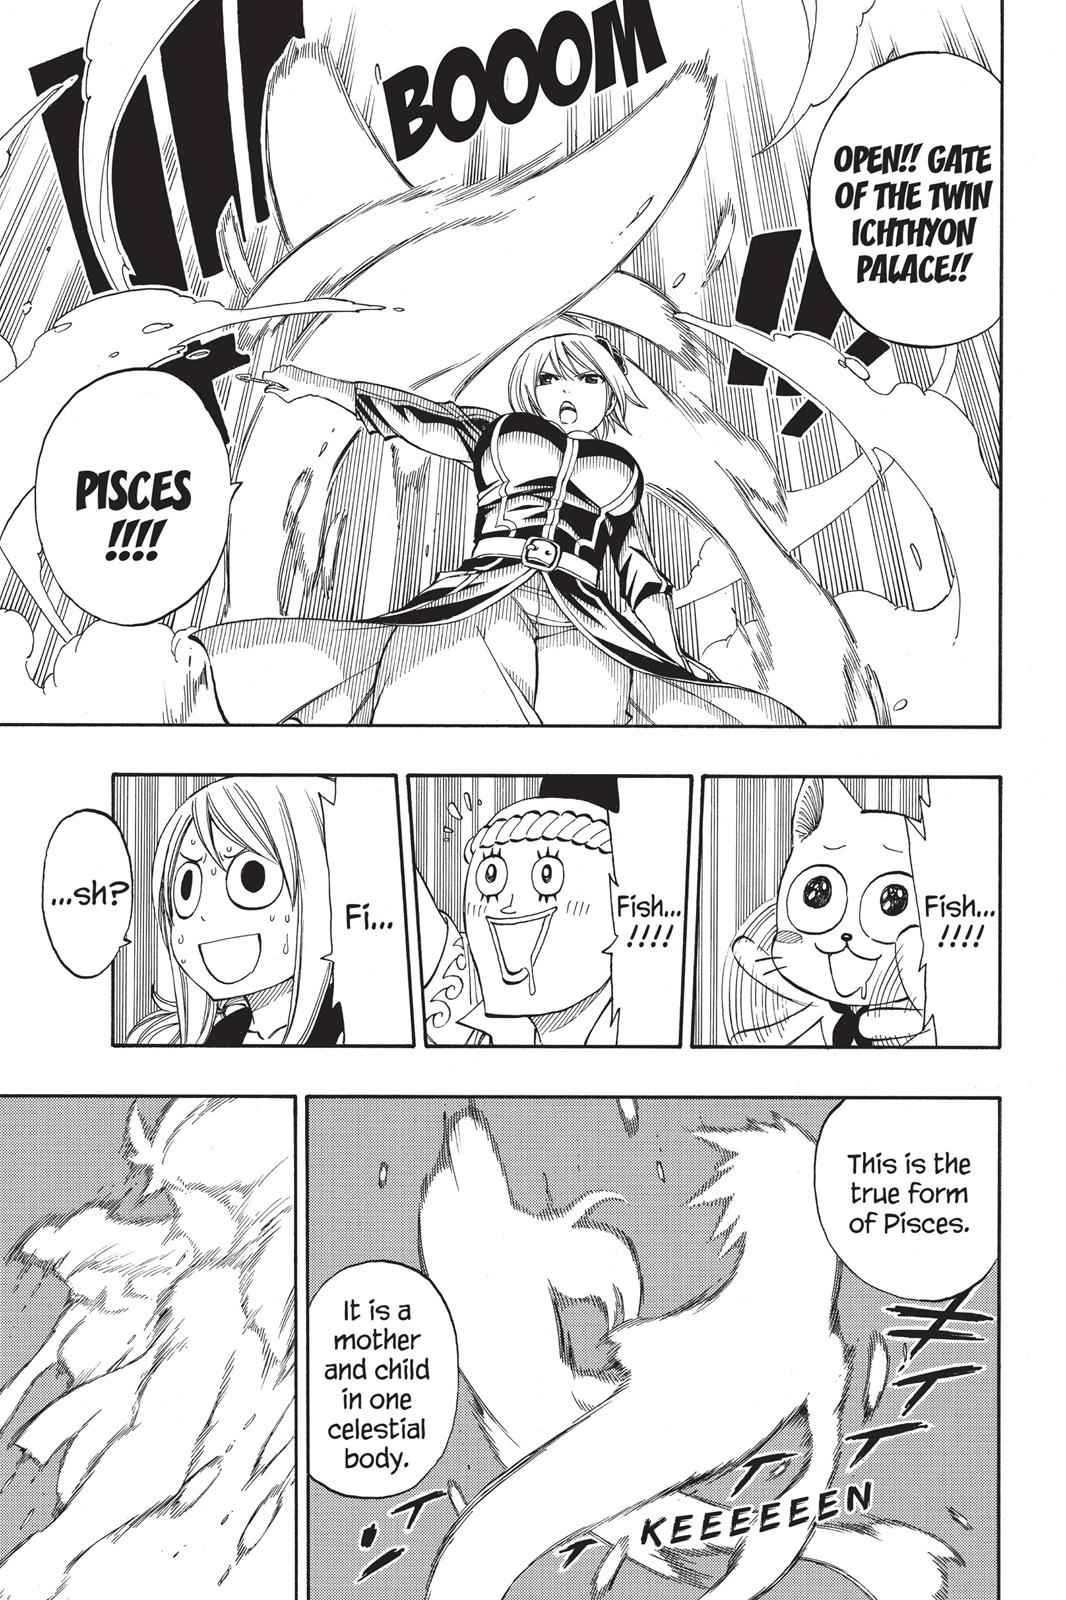  Chapter 310 image 003